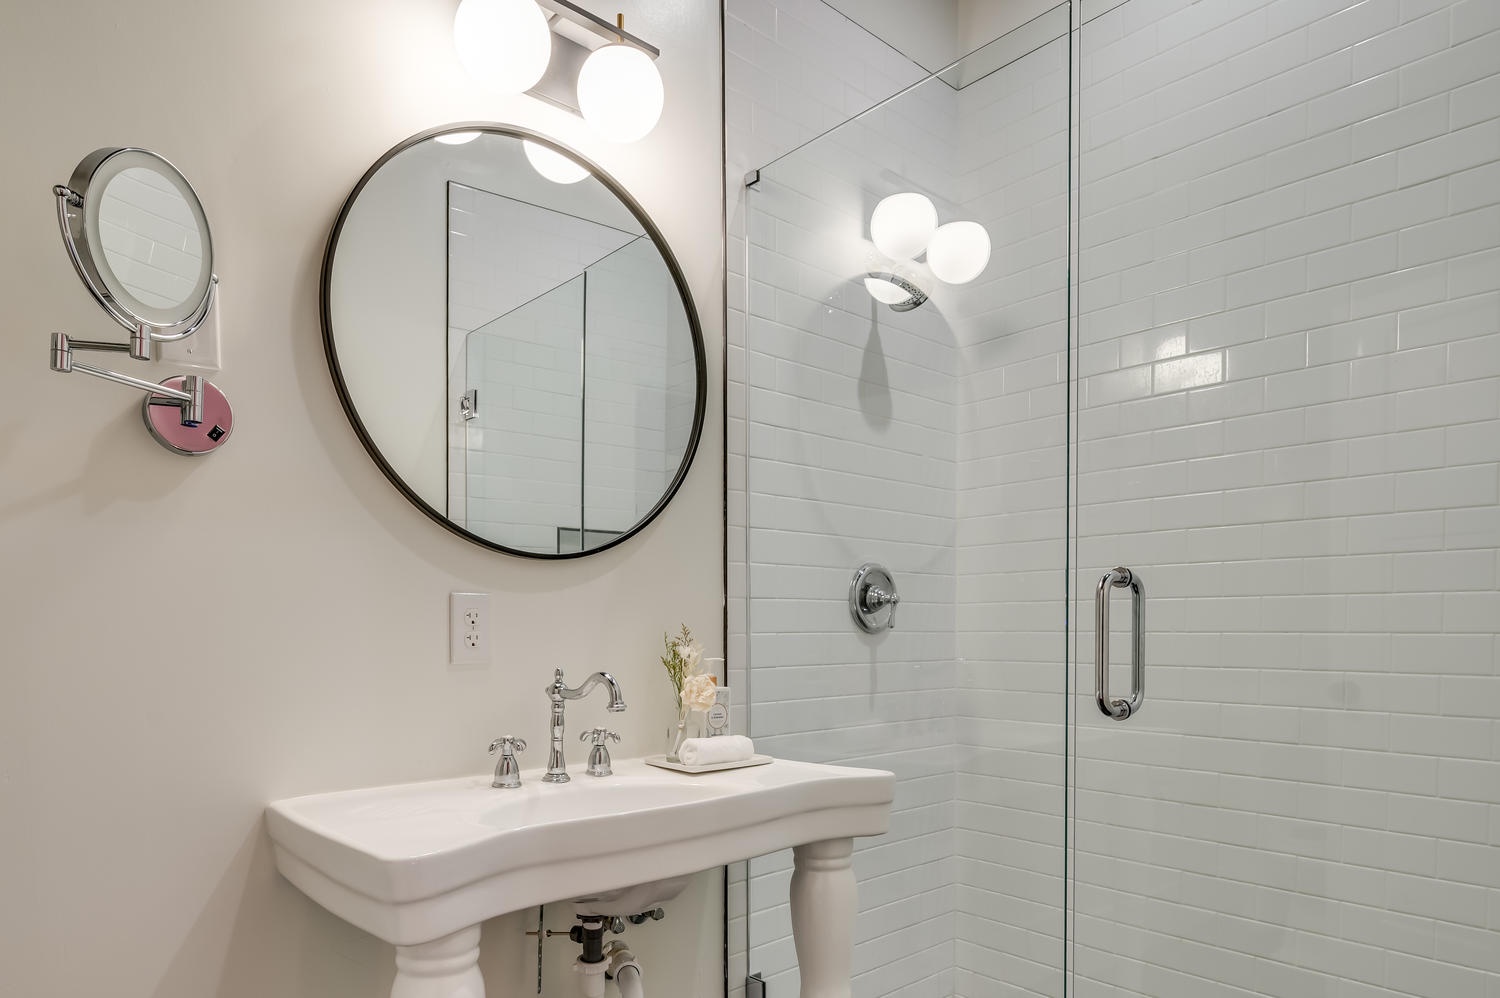 Suite 103 – The Accessible 1st Floor Chandelier Canopy En Suite offers a Single Vanity with makeup mirror and Roll-In Glass Shower